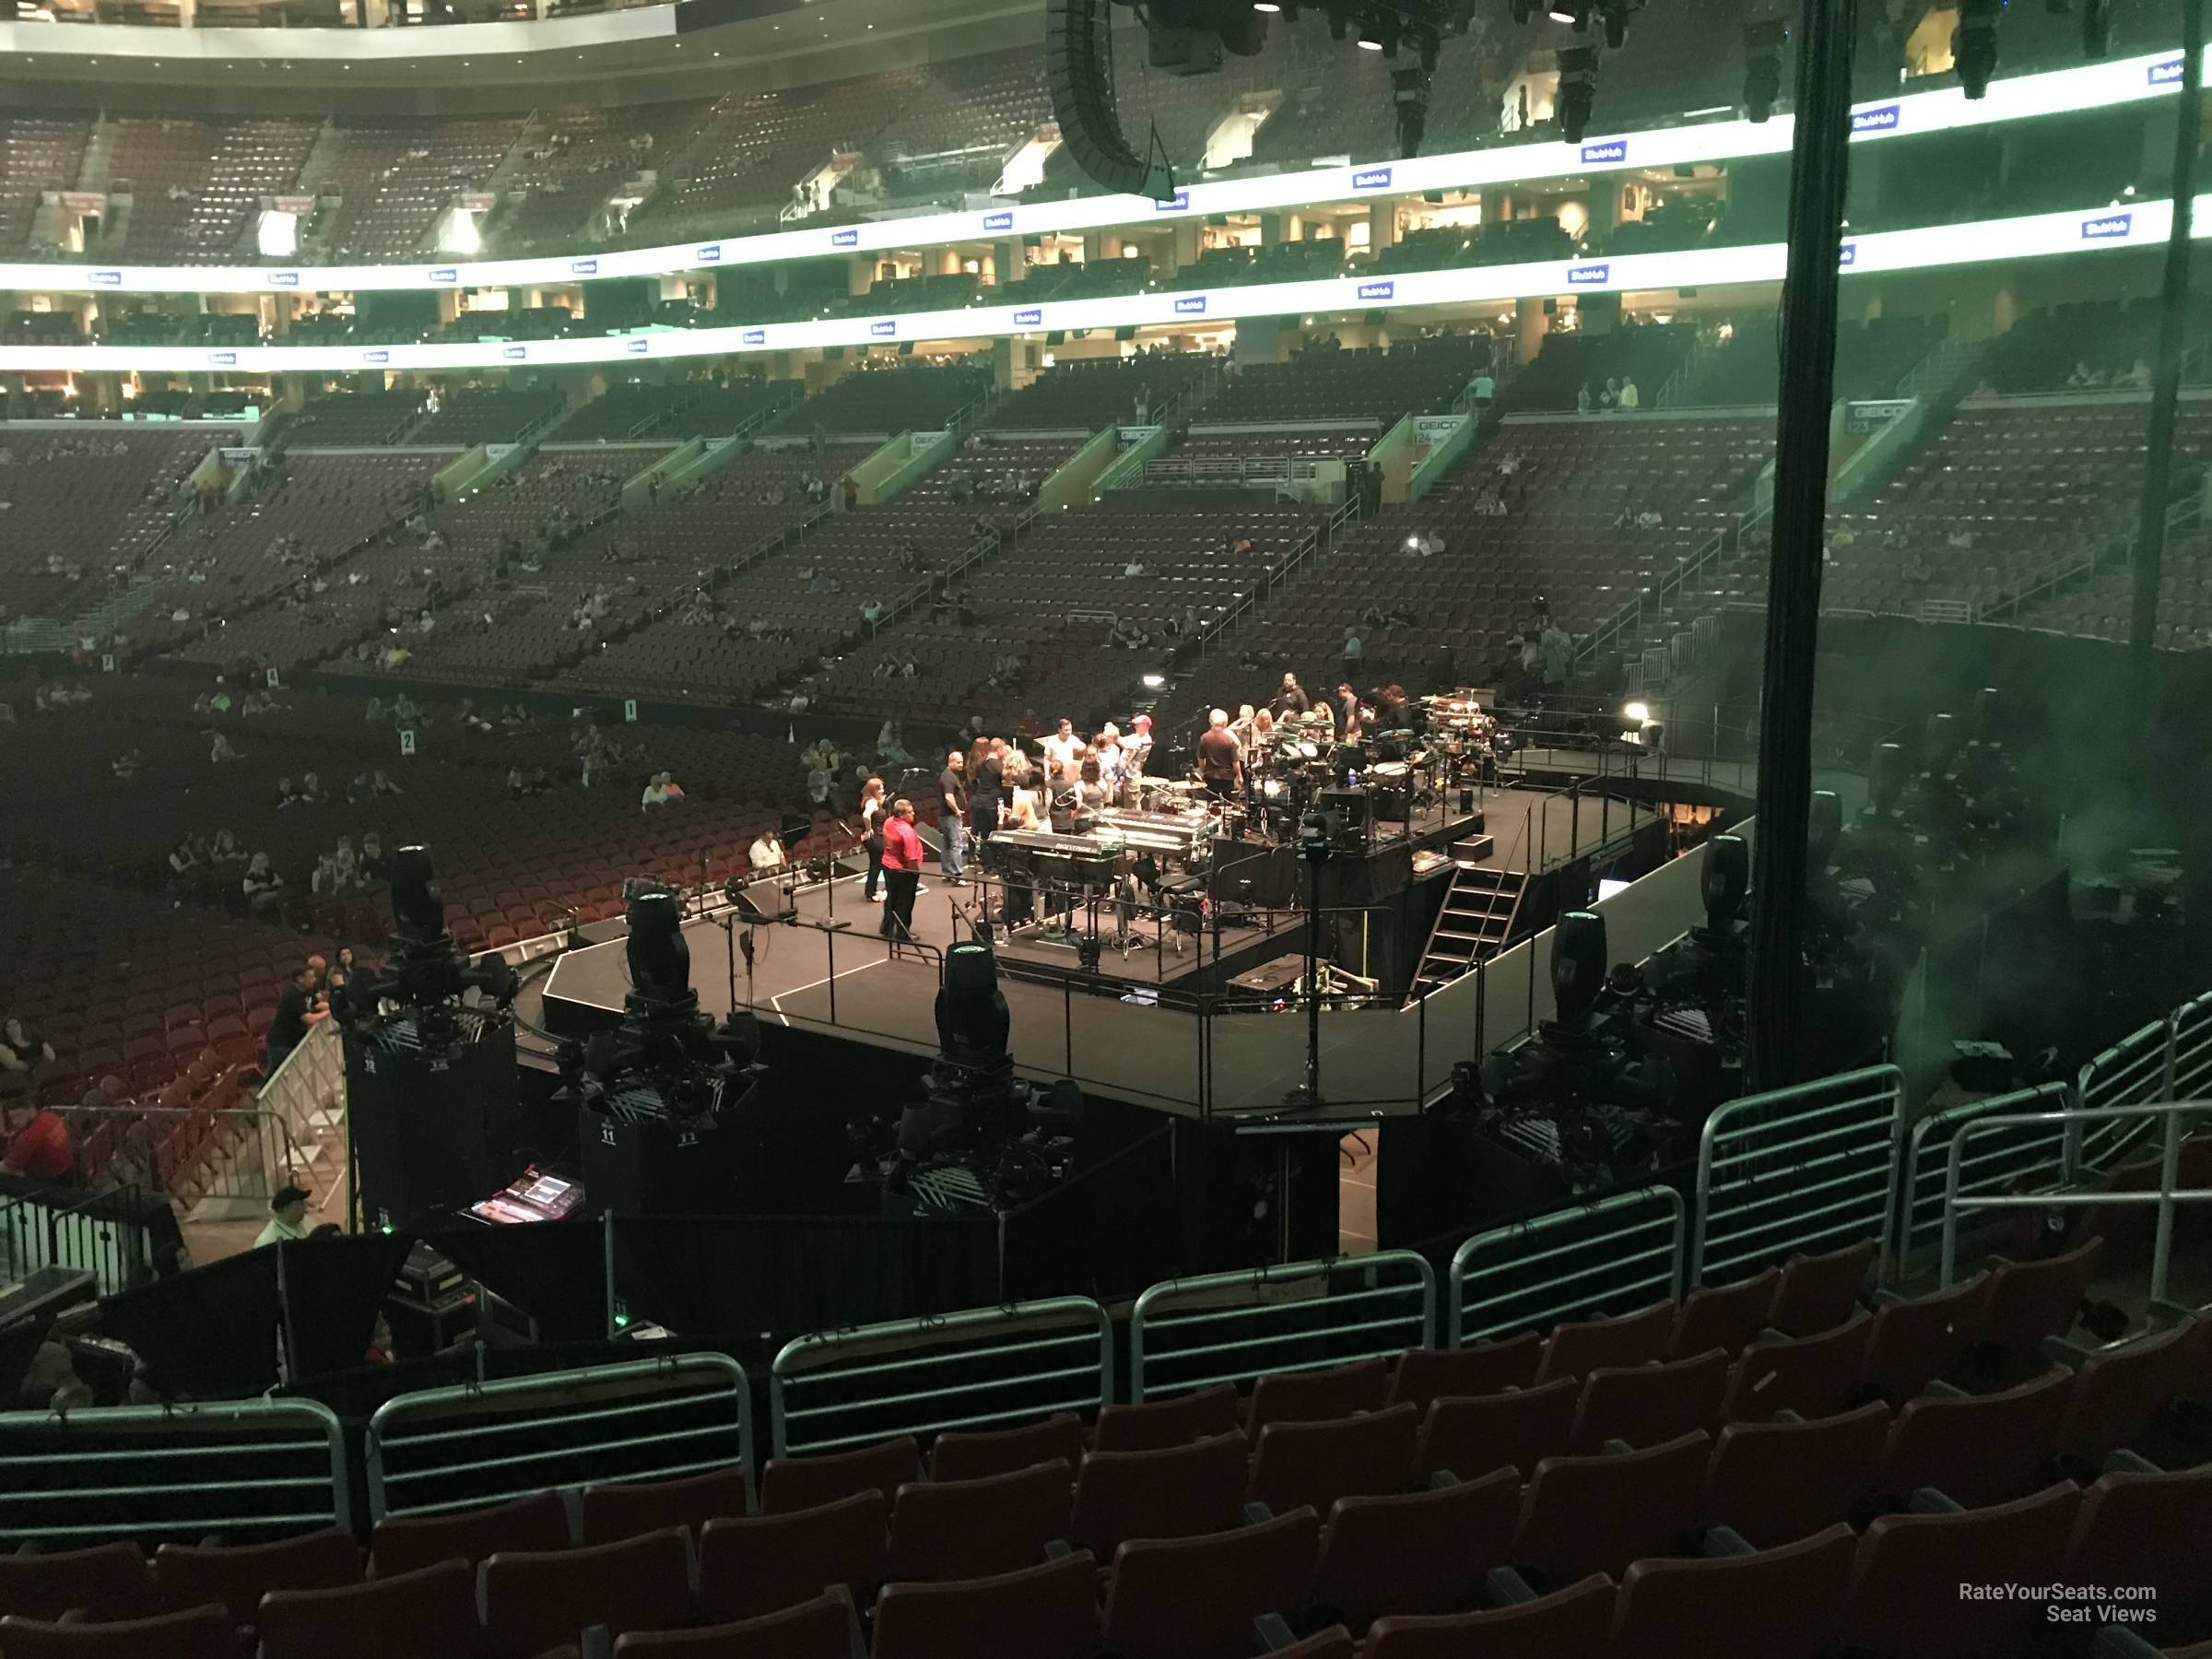 section 117, row 17 seat view  for concert - wells fargo center